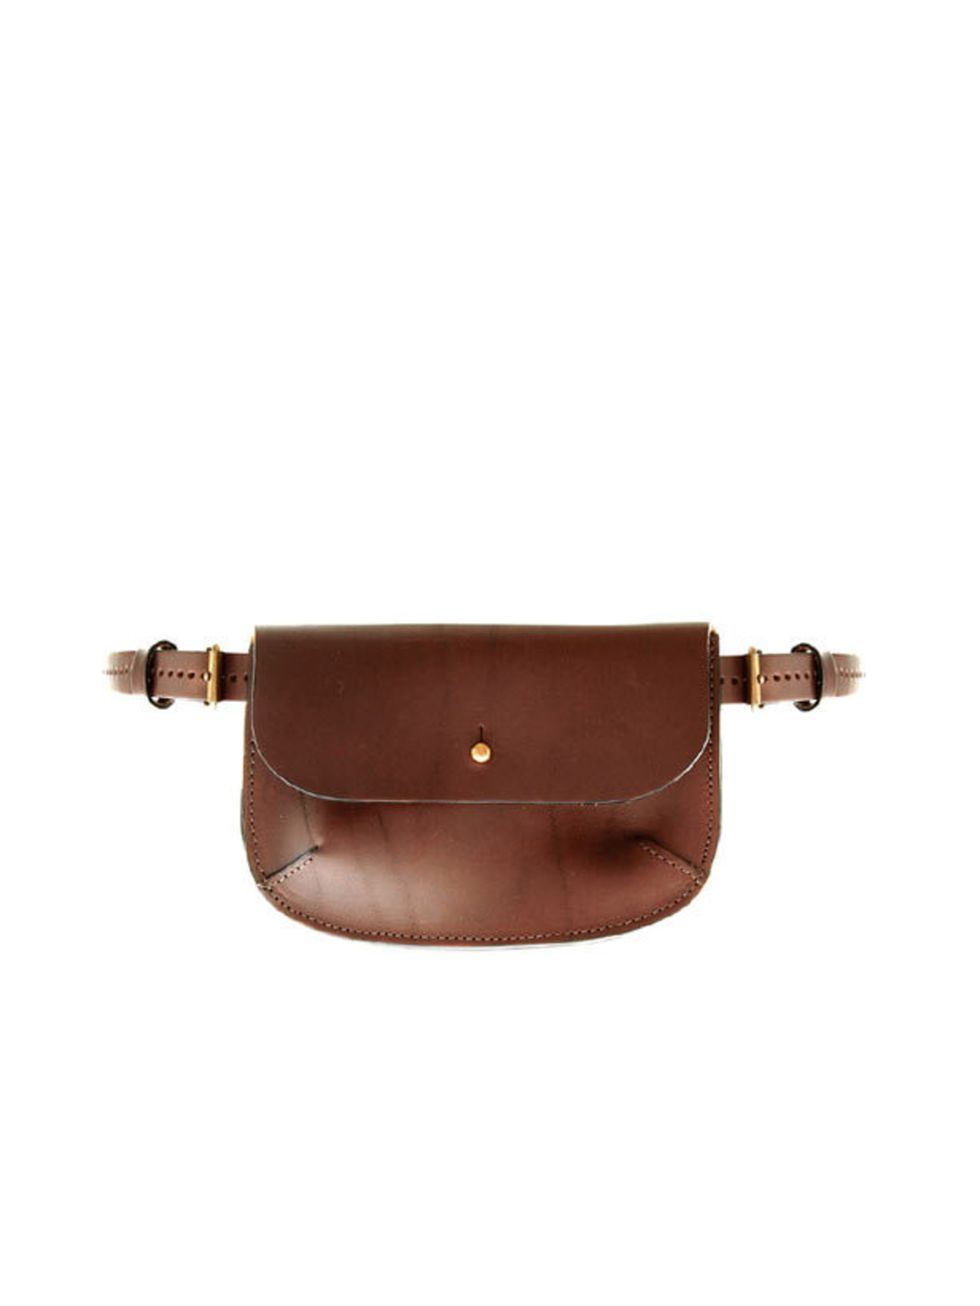 <p>Ally Capellino belt bag, £99, at <a href="http://www.asos.com/au/countryid/1/Ally-Capellino/Ally-Capellino-Belted-Pouch-Bag/Prod/pgeproduct.aspx?iid=1702576&amp;cid=11617&amp;sh=0&amp;pge=0&amp;pgesize=20&amp;sort=-1&amp;clr=Brown&amp;r=2">Asos</a></p>